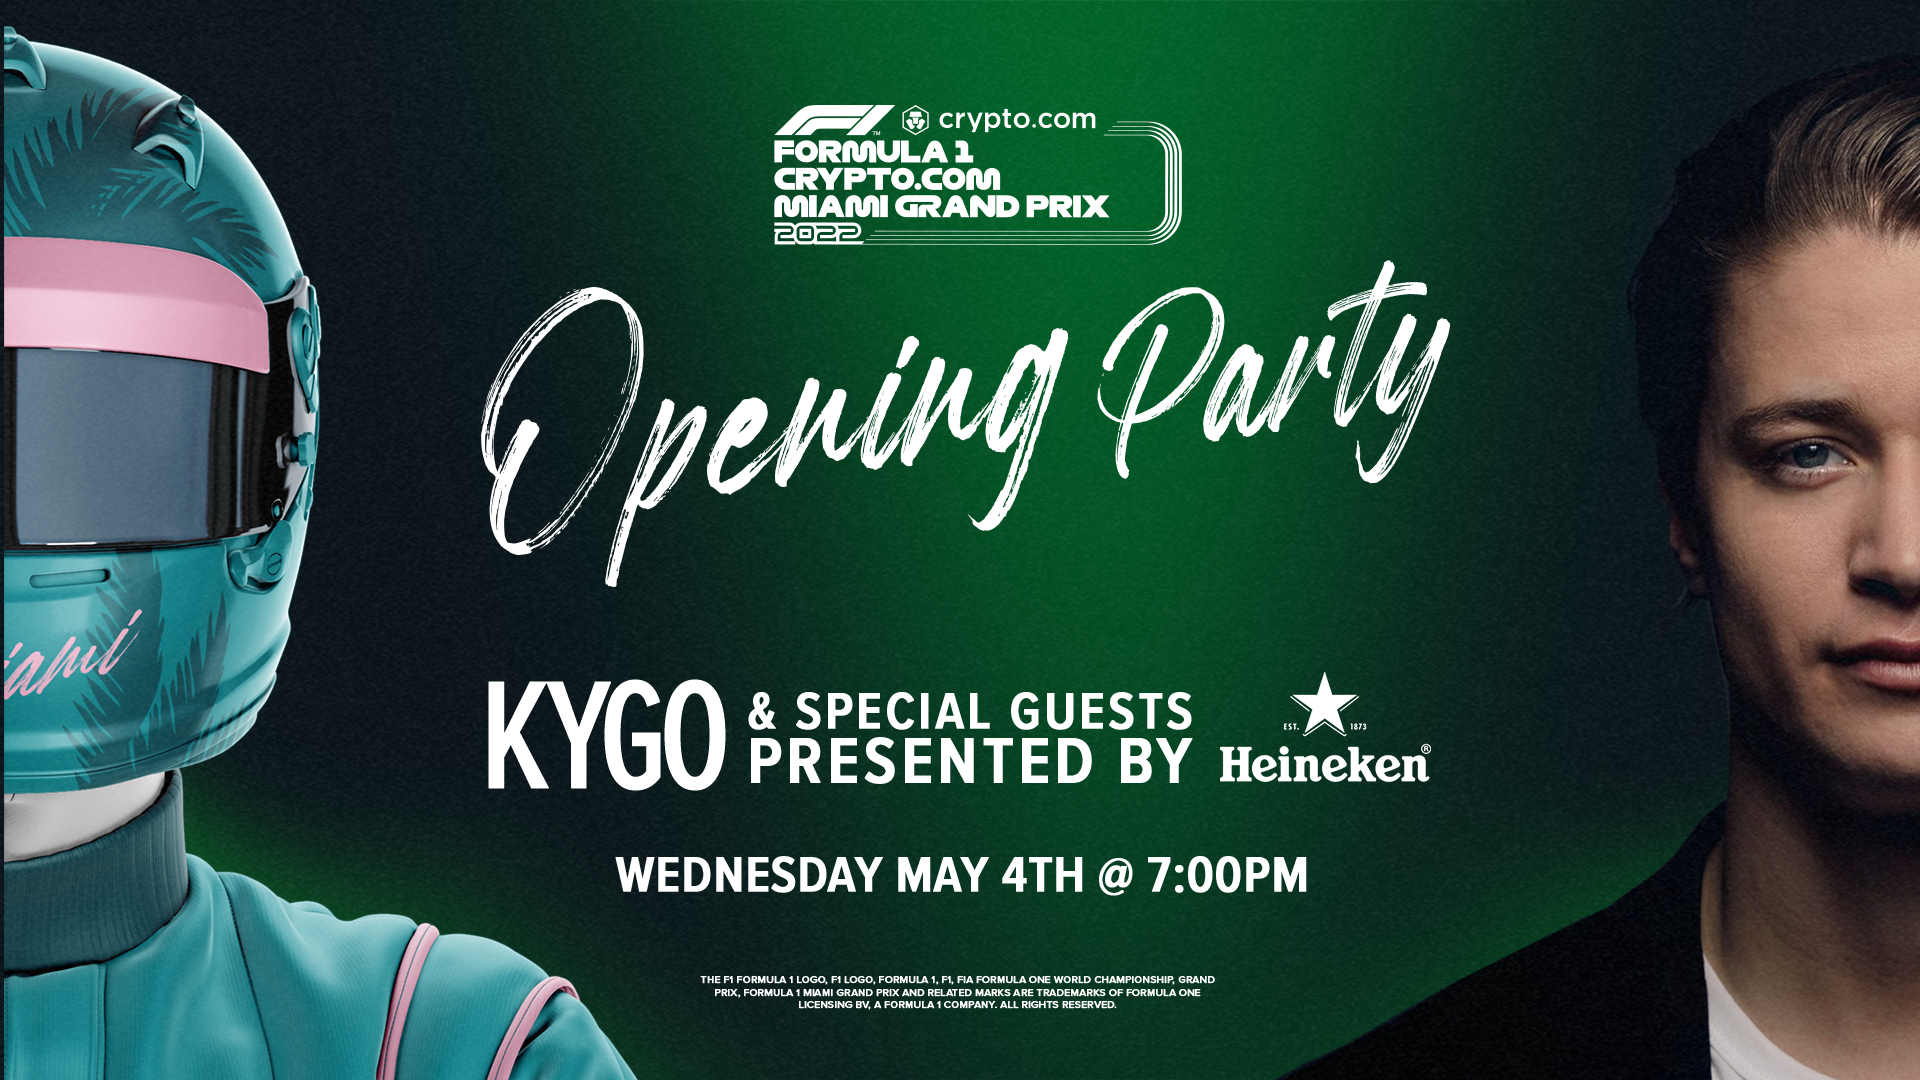 Formula 1® Crypto.com Miami Grand Prix Opening Party with Musical Performances presented by Heineken®